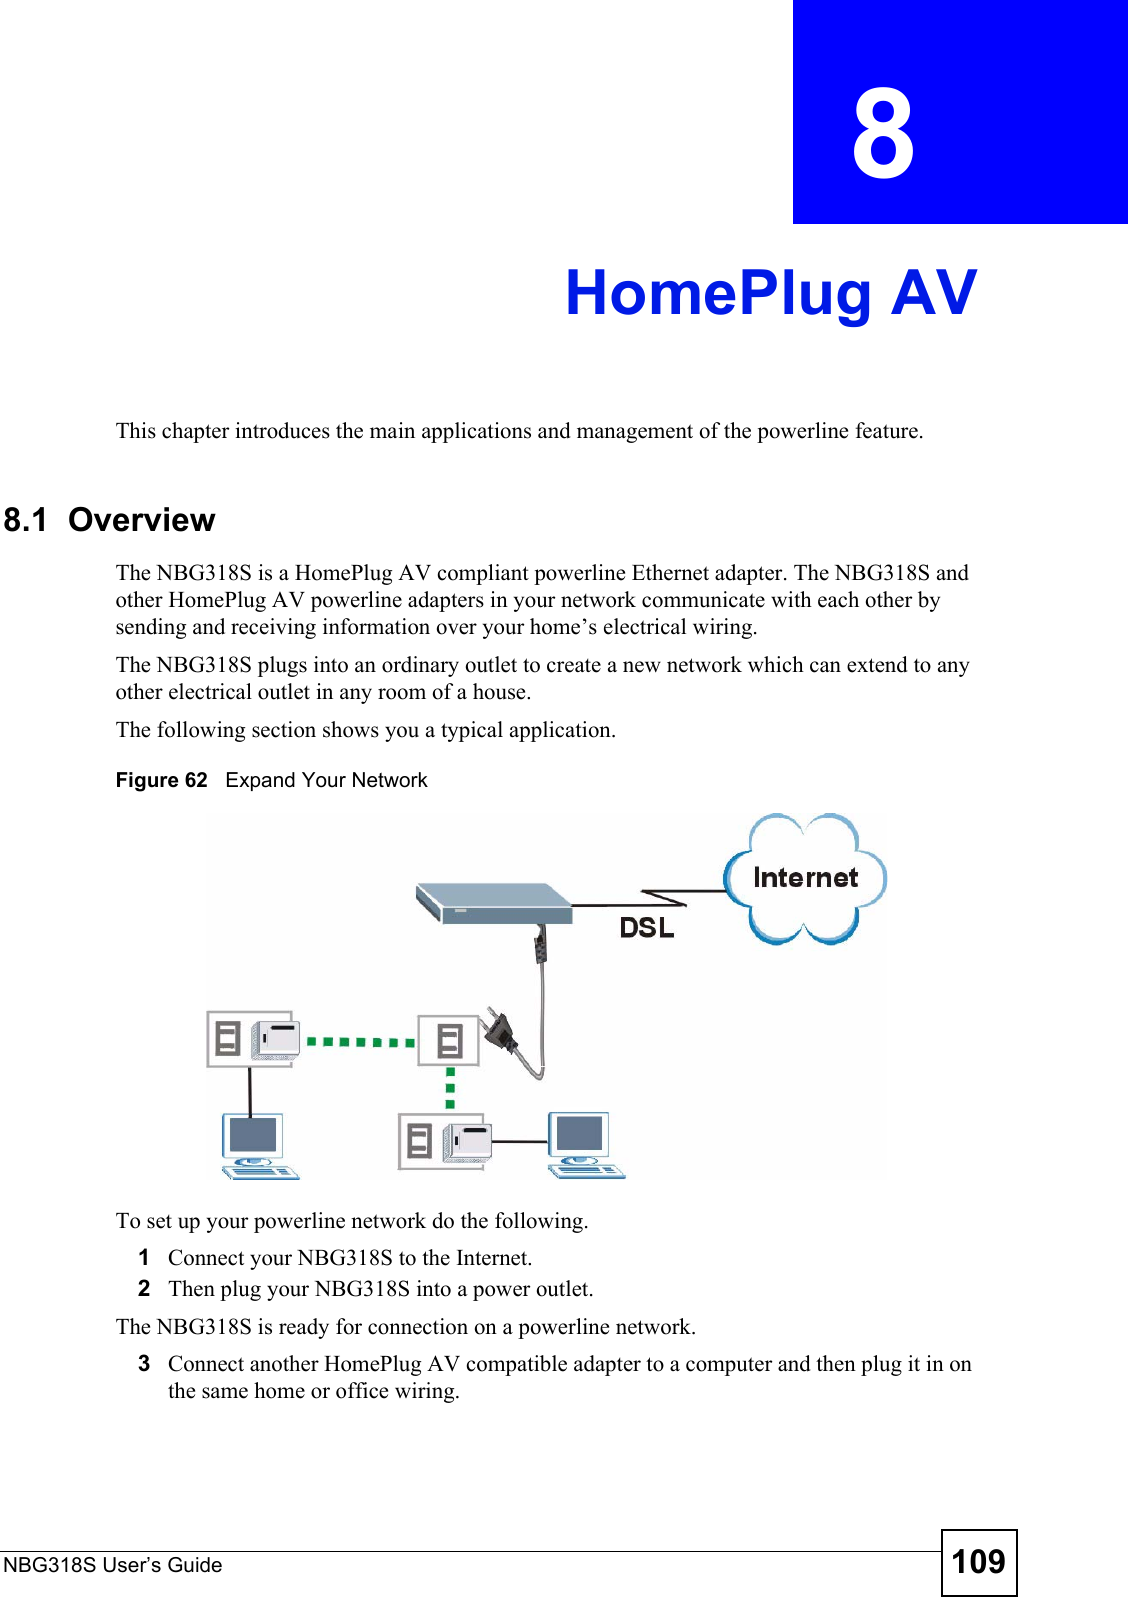 NBG318S User’s Guide 109CHAPTER  8 HomePlug AVThis chapter introduces the main applications and management of the powerline feature.8.1  OverviewThe NBG318S is a HomePlug AV compliant powerline Ethernet adapter. The NBG318S and other HomePlug AV powerline adapters in your network communicate with each other by sending and receiving information over your home’s electrical wiring. The NBG318S plugs into an ordinary outlet to create a new network which can extend to any other electrical outlet in any room of a house.The following section shows you a typical application. Figure 62   Expand Your NetworkTo set up your powerline network do the following.1Connect your NBG318S to the Internet. 2Then plug your NBG318S into a power outlet. The NBG318S is ready for connection on a powerline network. 3Connect another HomePlug AV compatible adapter to a computer and then plug it in on the same home or office wiring. 